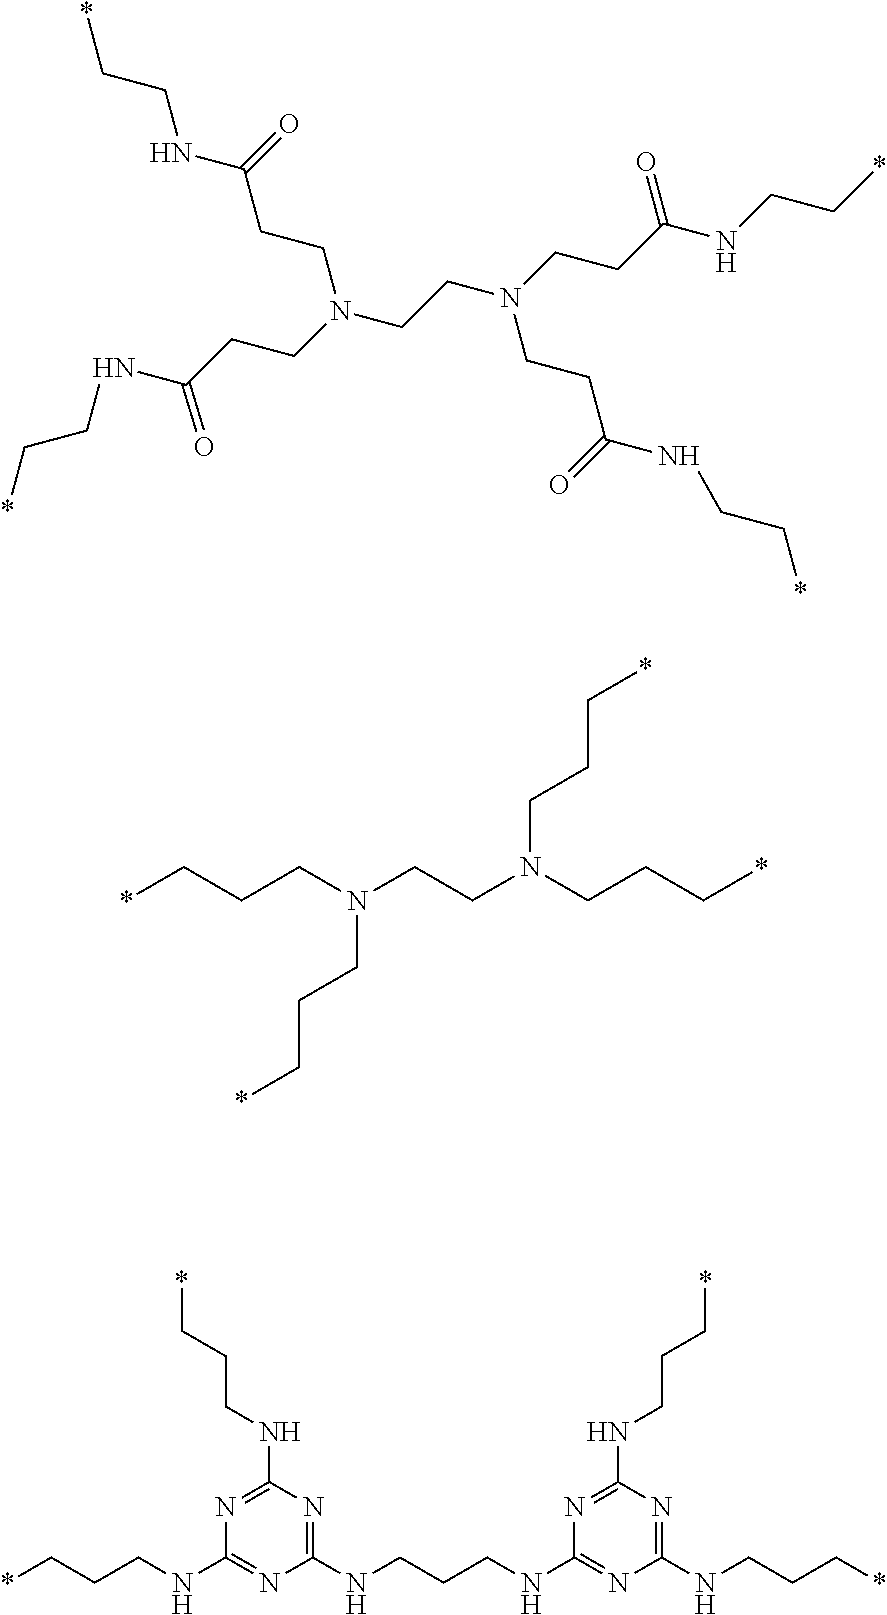 Branched polymeric biguanide compounds and their uses